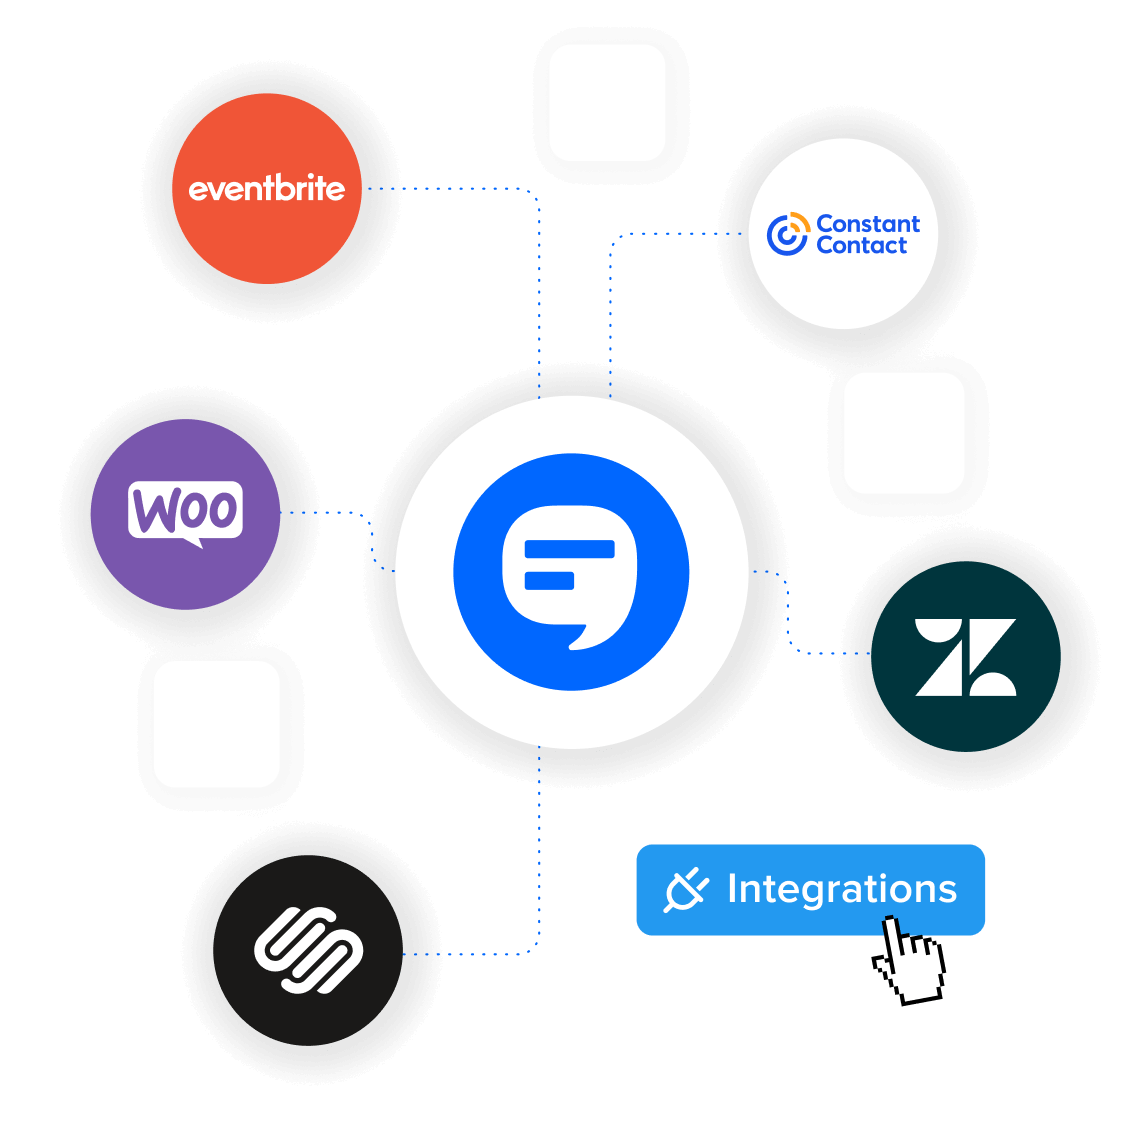 An integration network graphic centered around a mass texting service, connecting to various apps like Eventbrite and WooCommerce, illustrating how mass texting services can be integrated into a wide range of business tools.